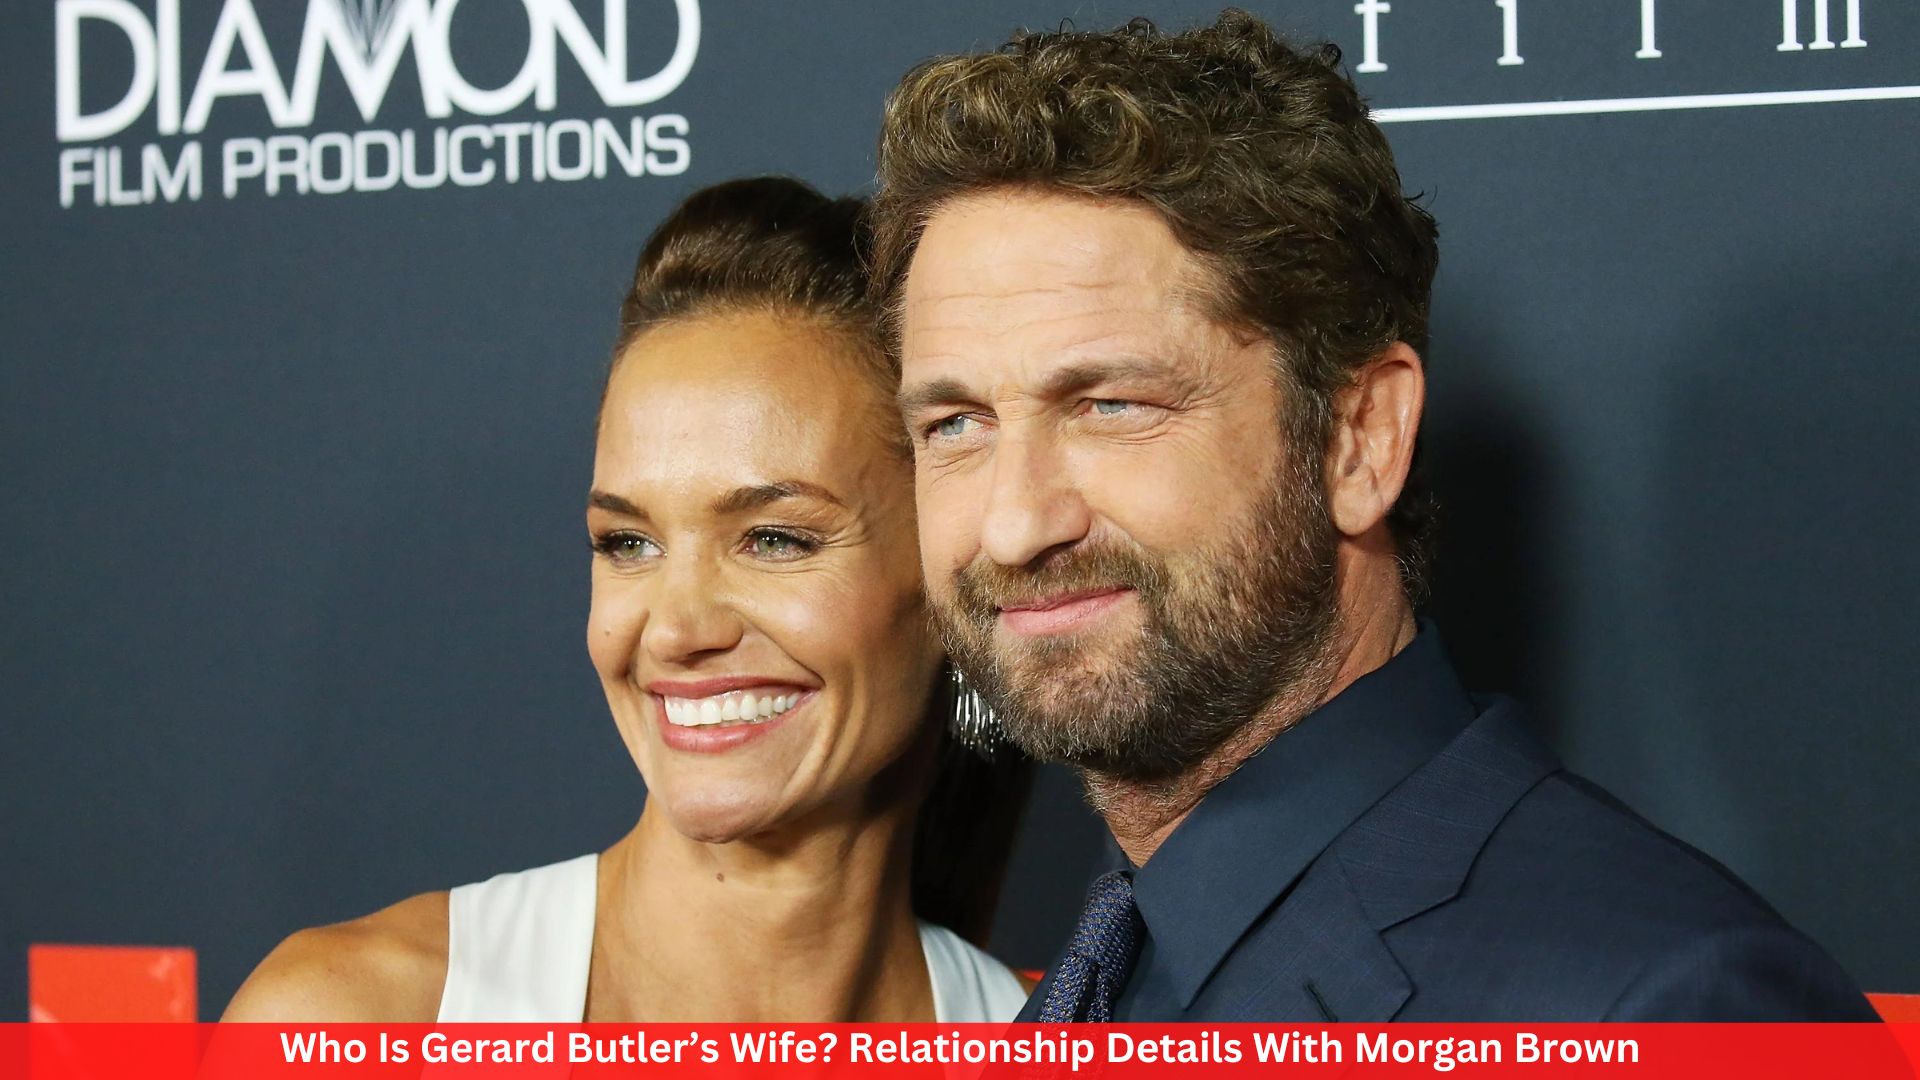 Who Is Gerard Butler’s Wife? Relationship Details With Morgan Brown